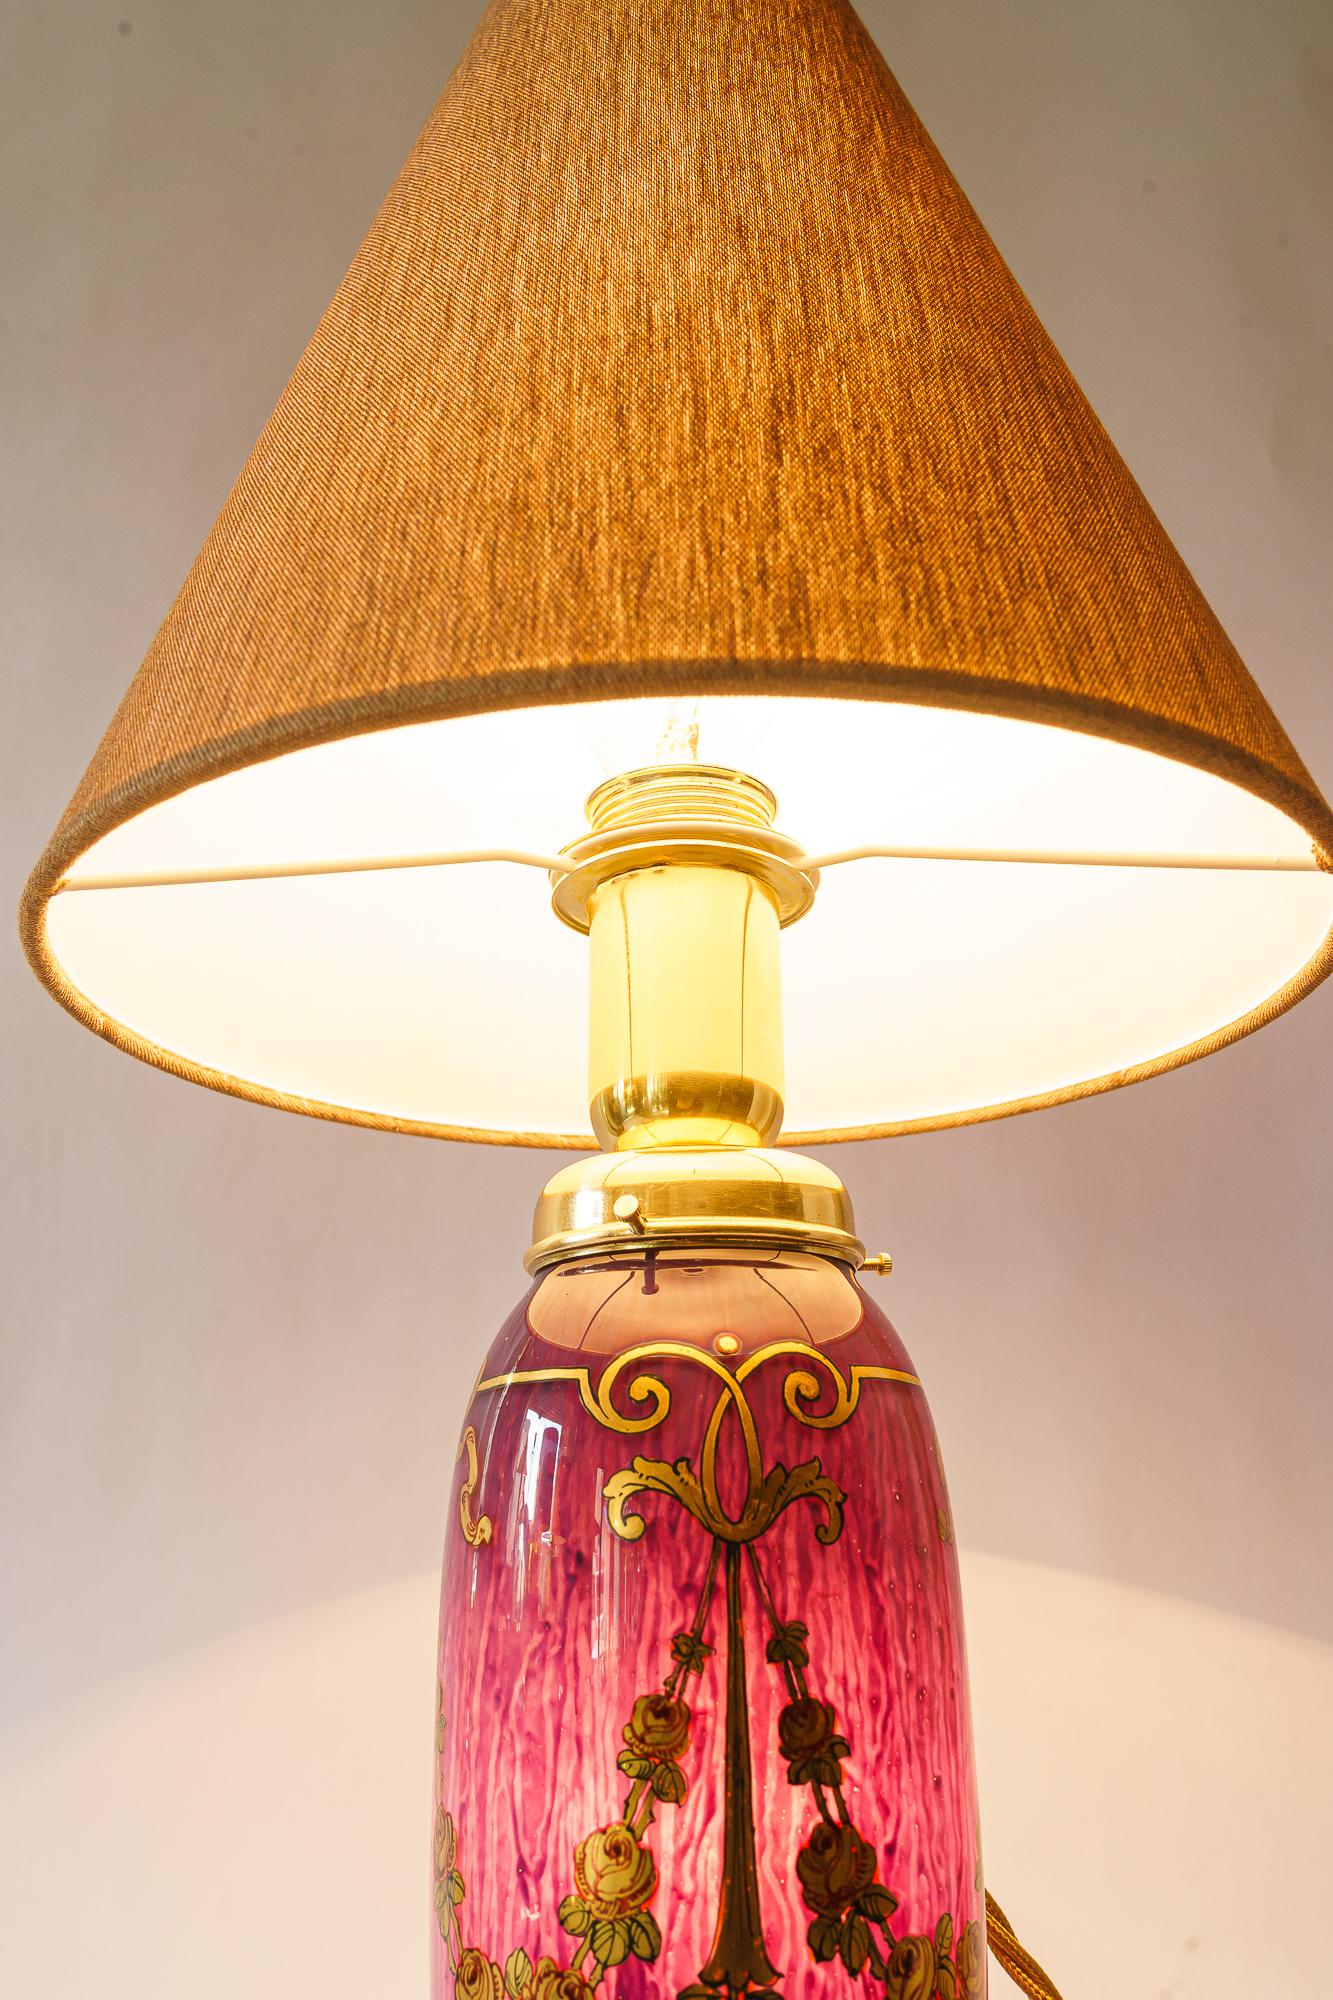 Rare Art Deco Glass Table Lamp with Fabric Shade, Vienna, Around 1920s  For Sale 4